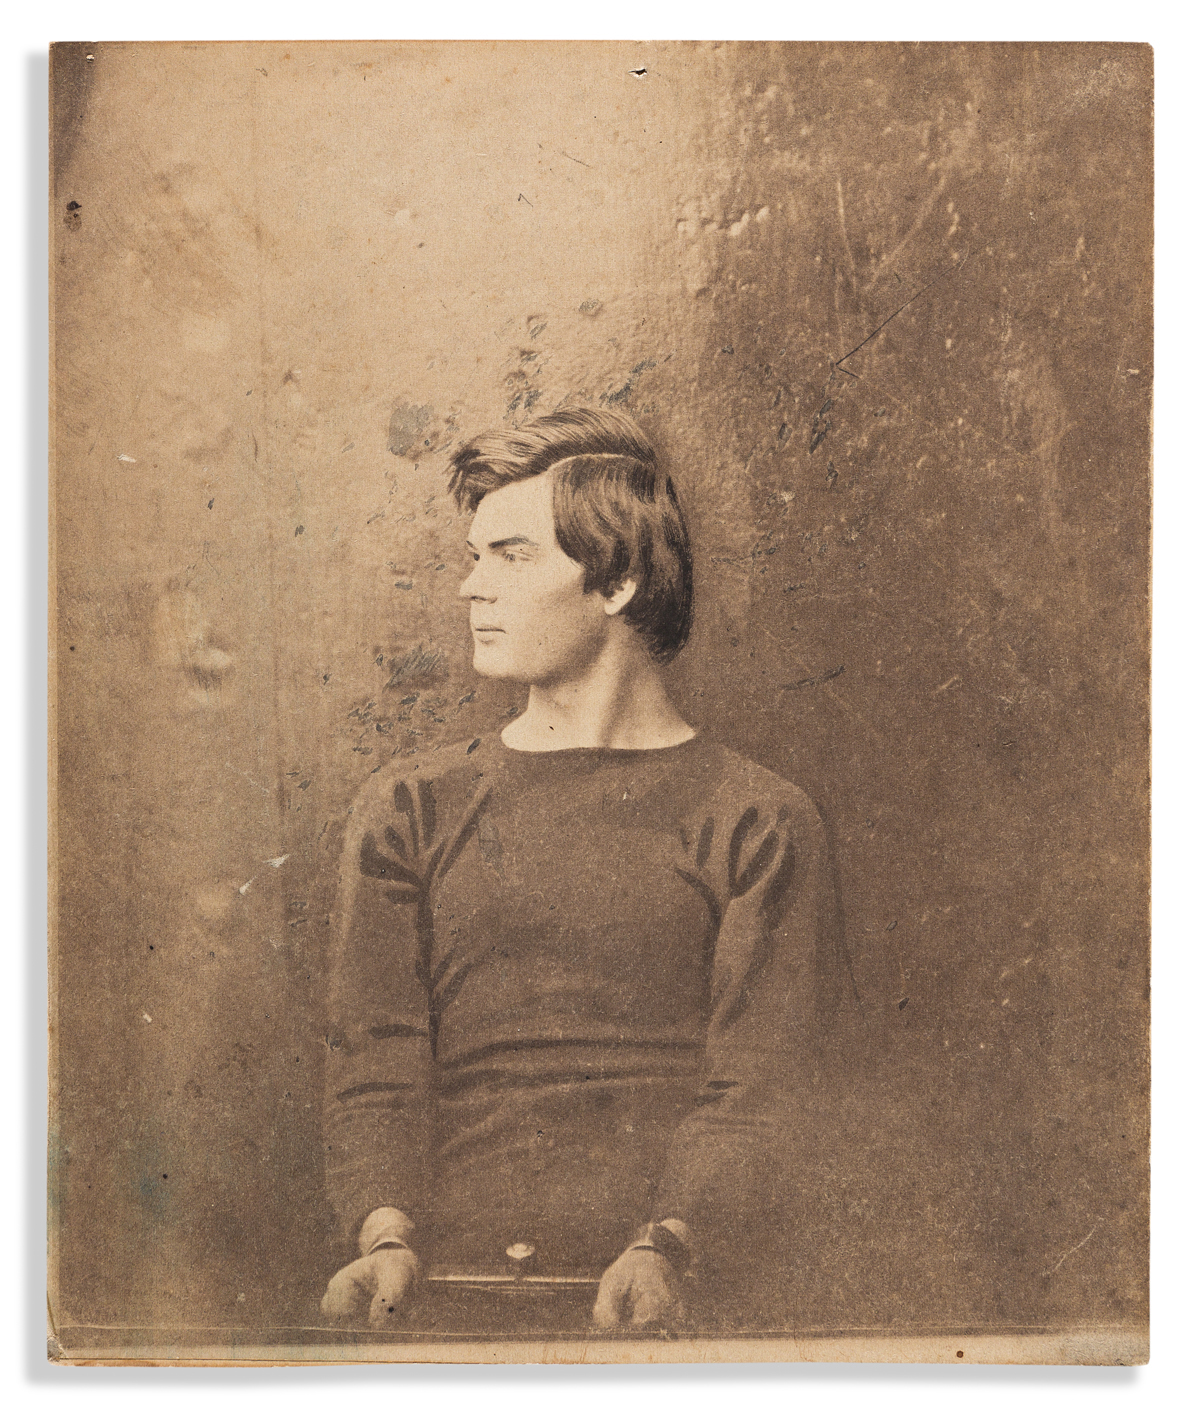 (ABRAHAM LINCOLN.) Group of retouched photographs of five Lincoln conspirators, used by Alexander Gardner for cartes-de-visite.